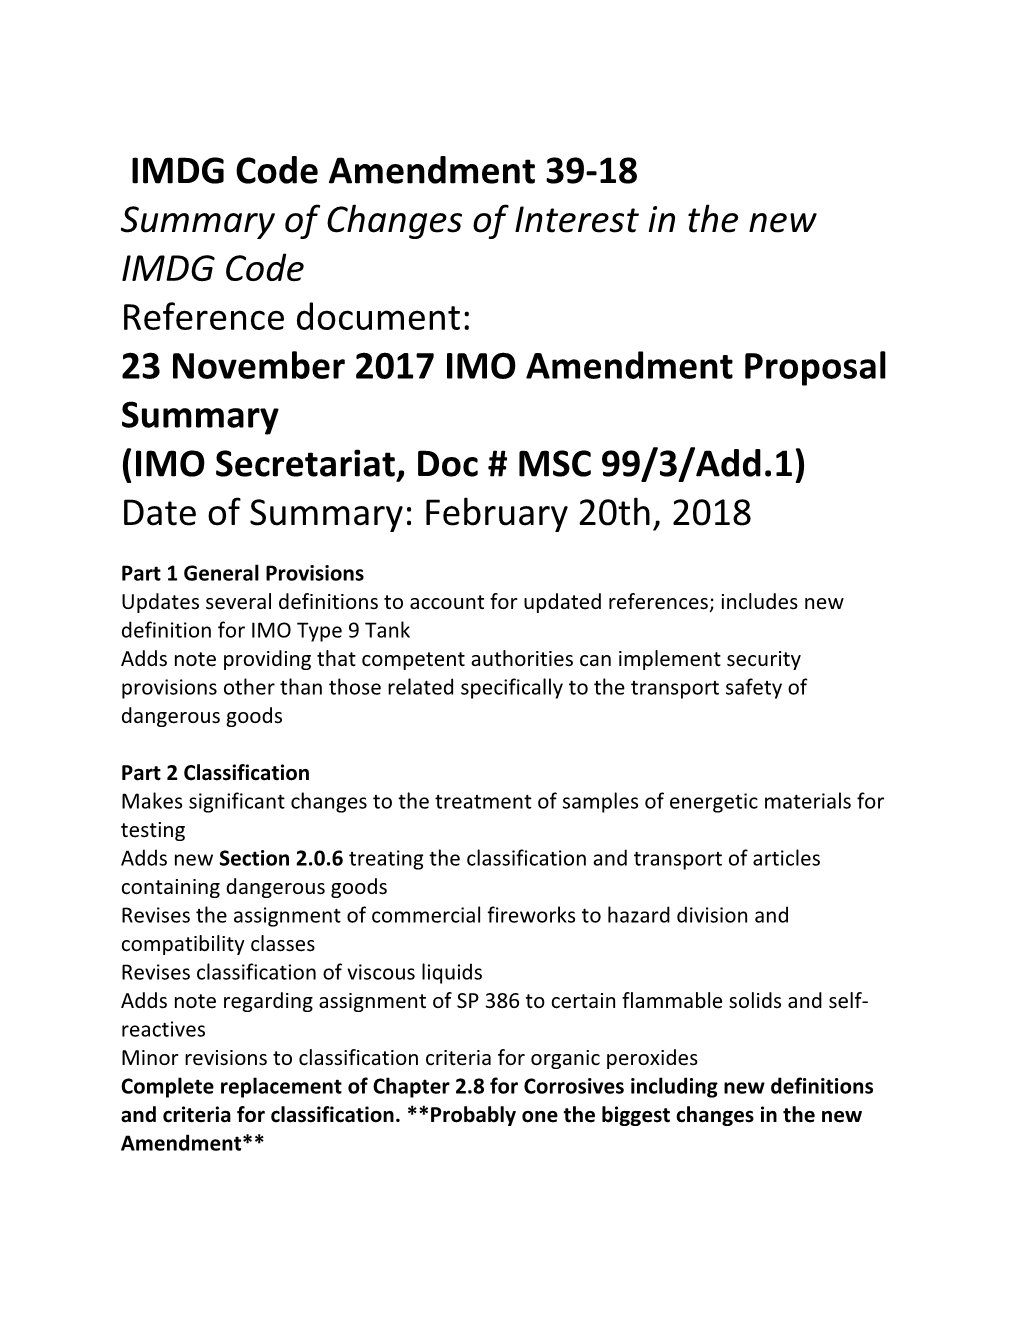 Summary of Changes of Interest in the New IMDG Code